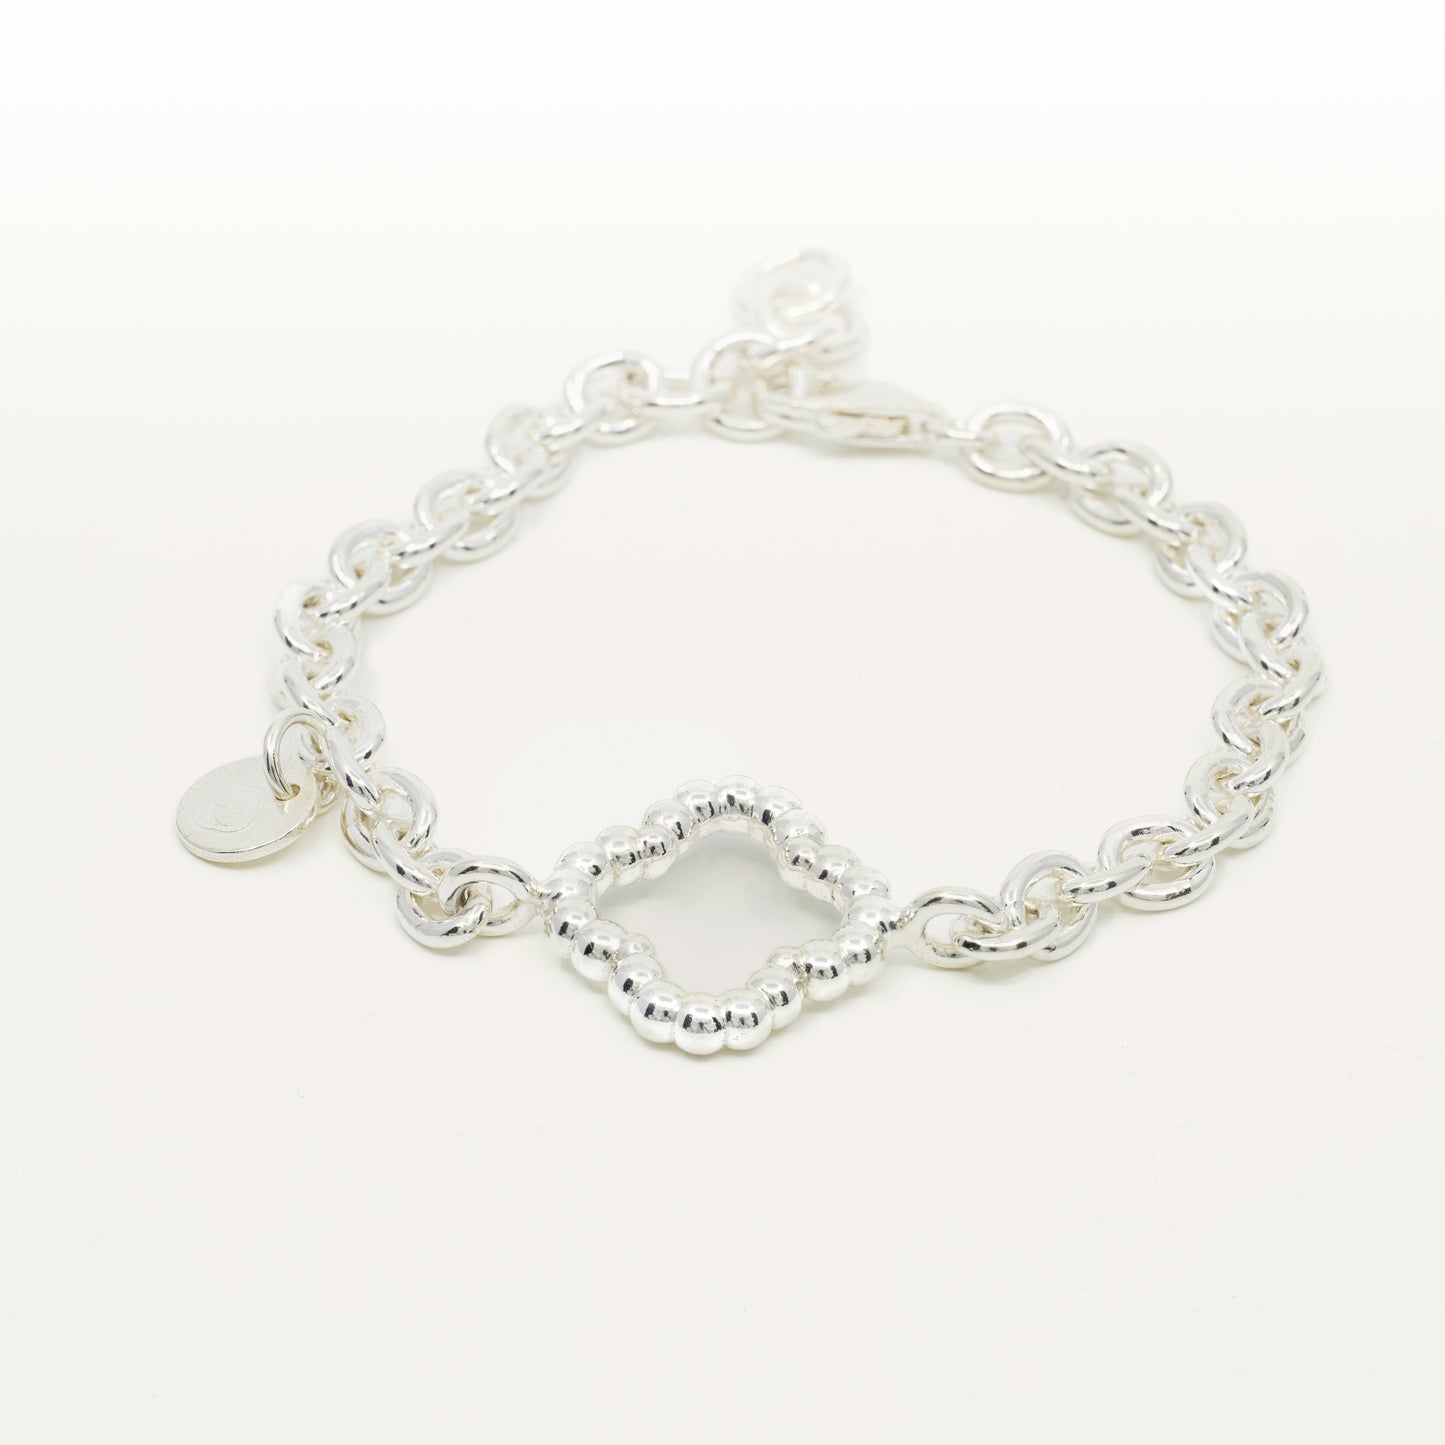 Creo Marbles Deluxe - Silver bracelet